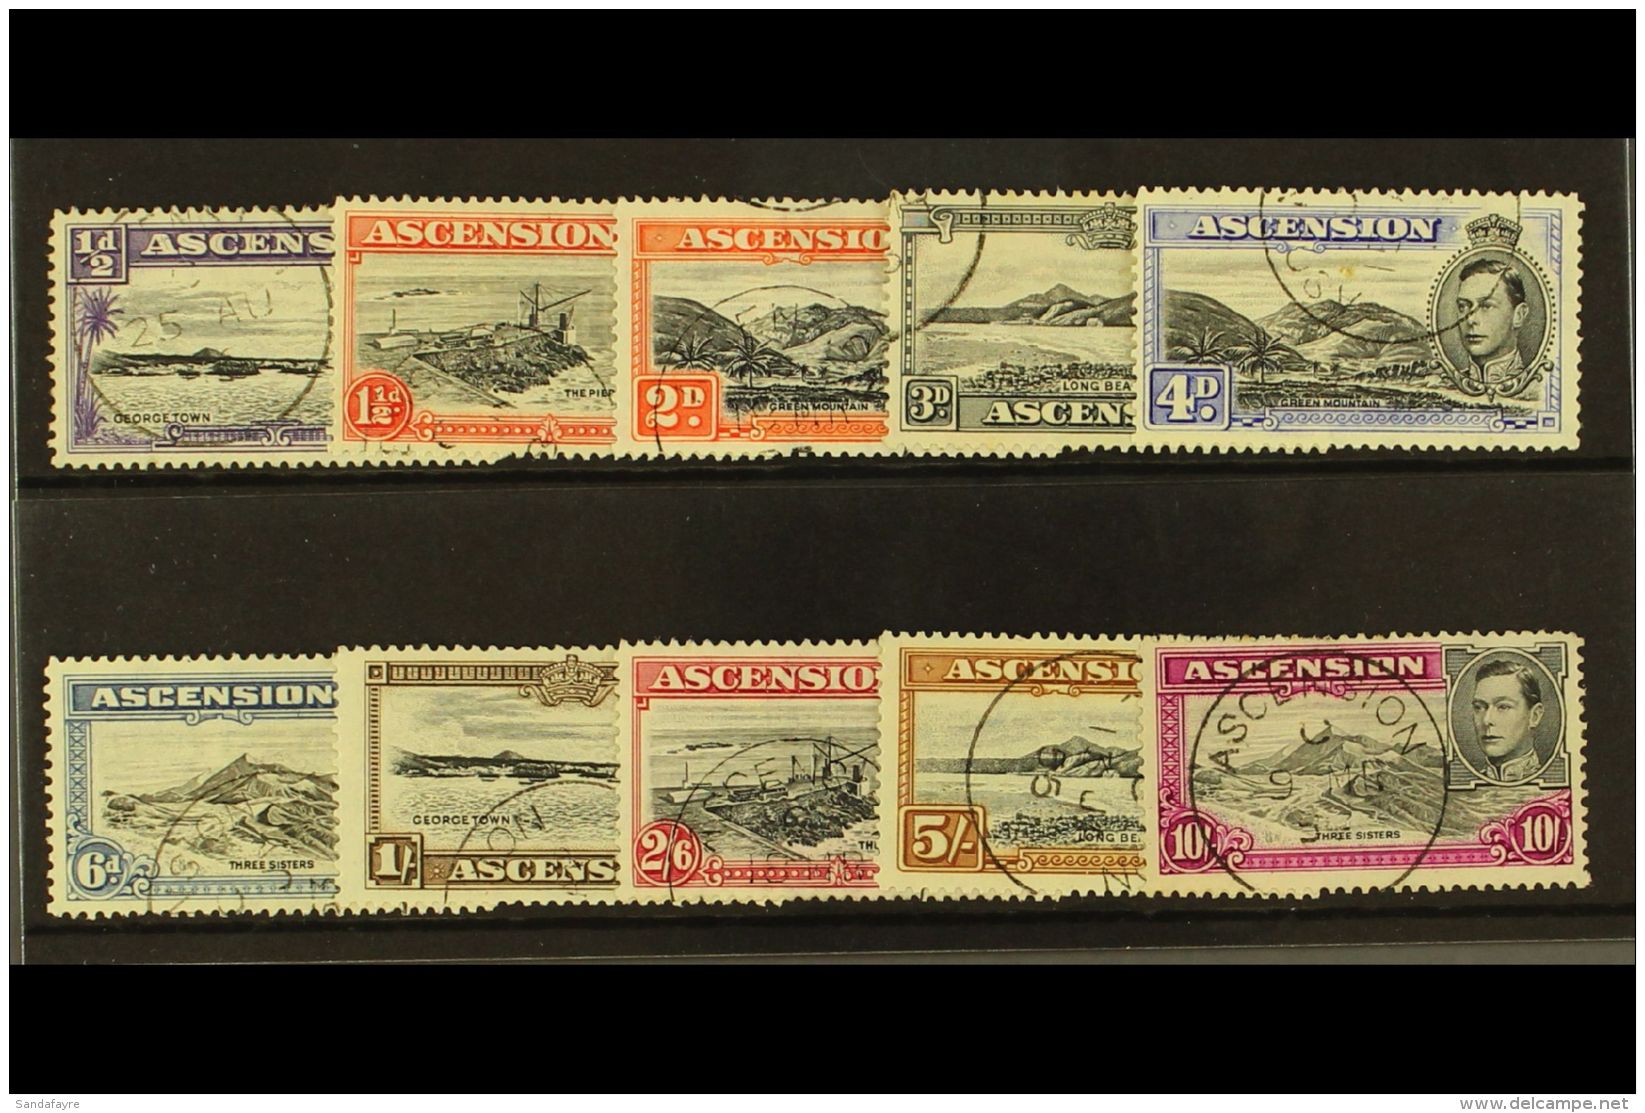 1944 Perf 13 Range Of Fine Cds Used Values To 2s6d, 5s And 10s. (10 Stamps) For More Images, Please Visit... - Ascensión